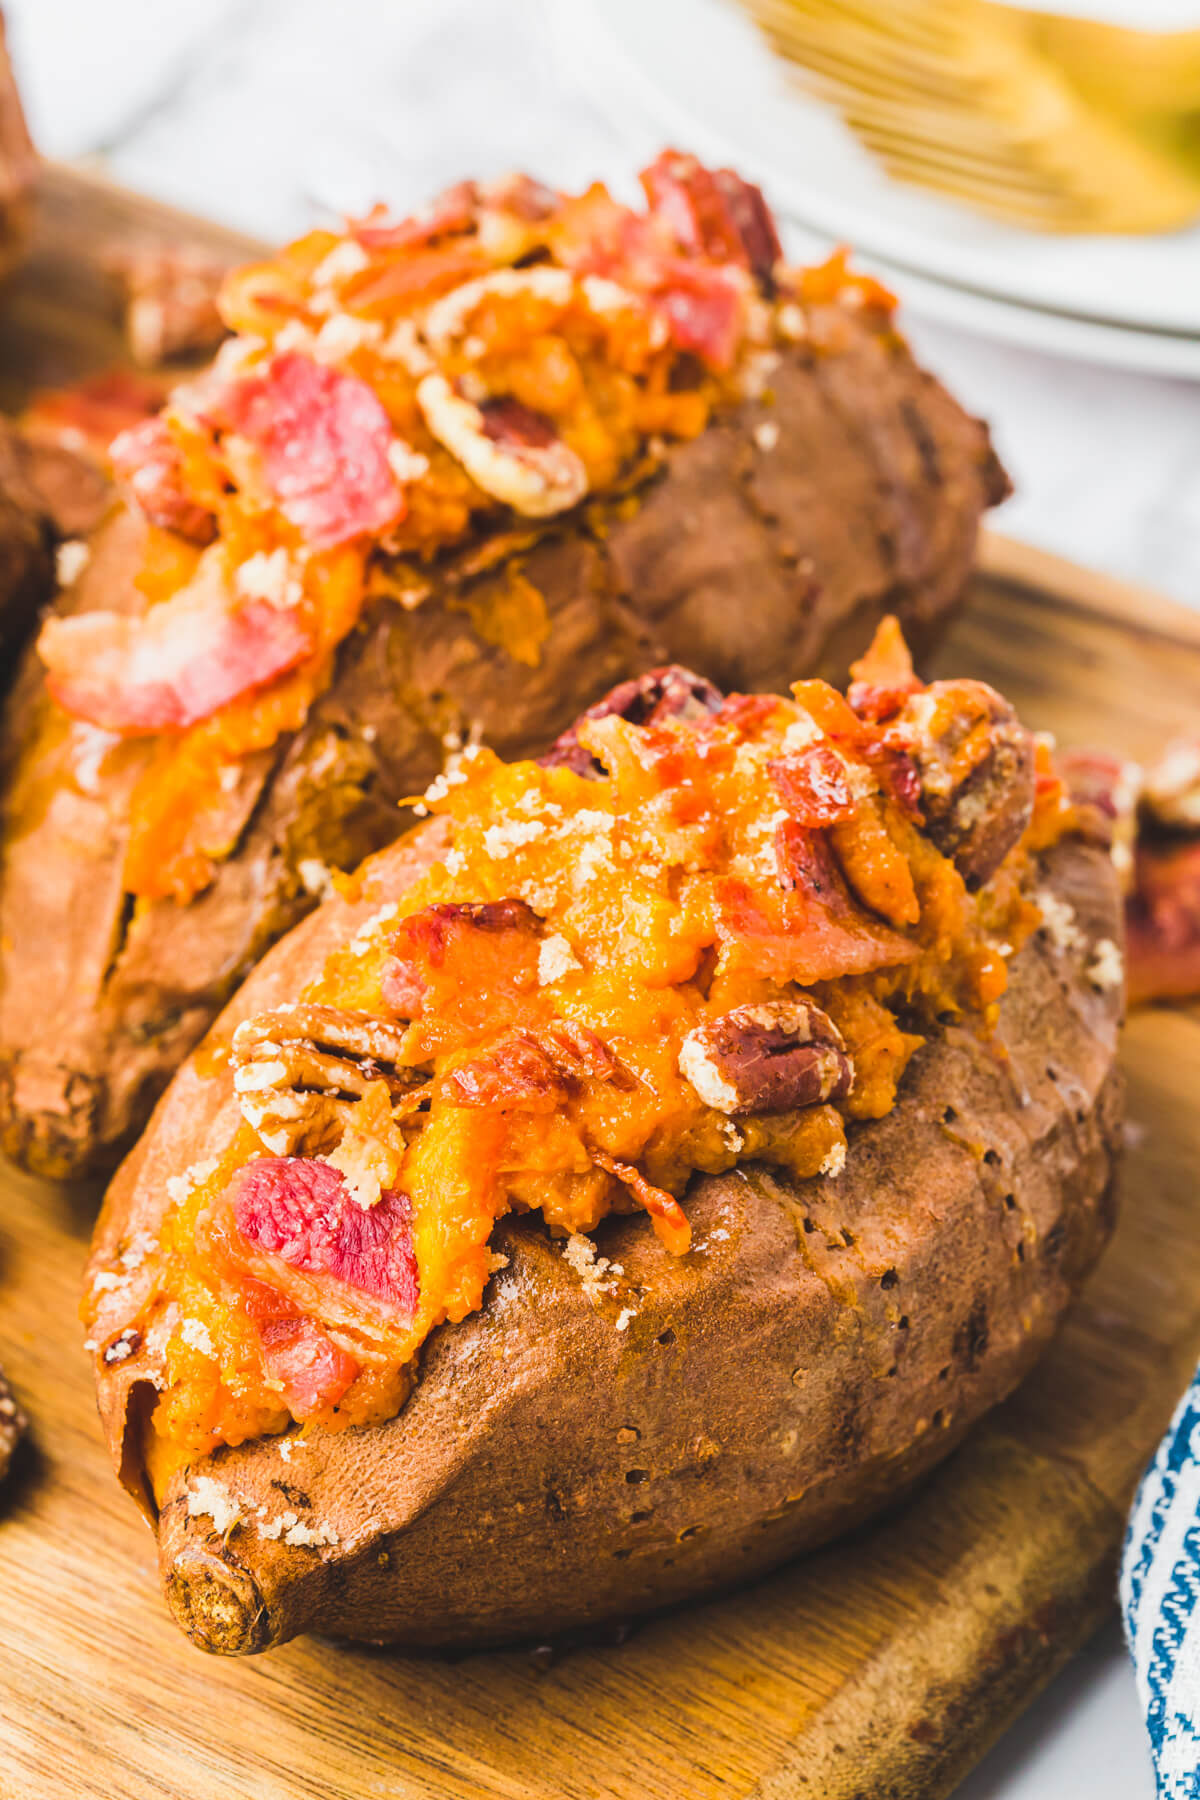 Two Twice Baked Sweet Potatoes topped with crispy bacon and pecans on a wooden serving board.